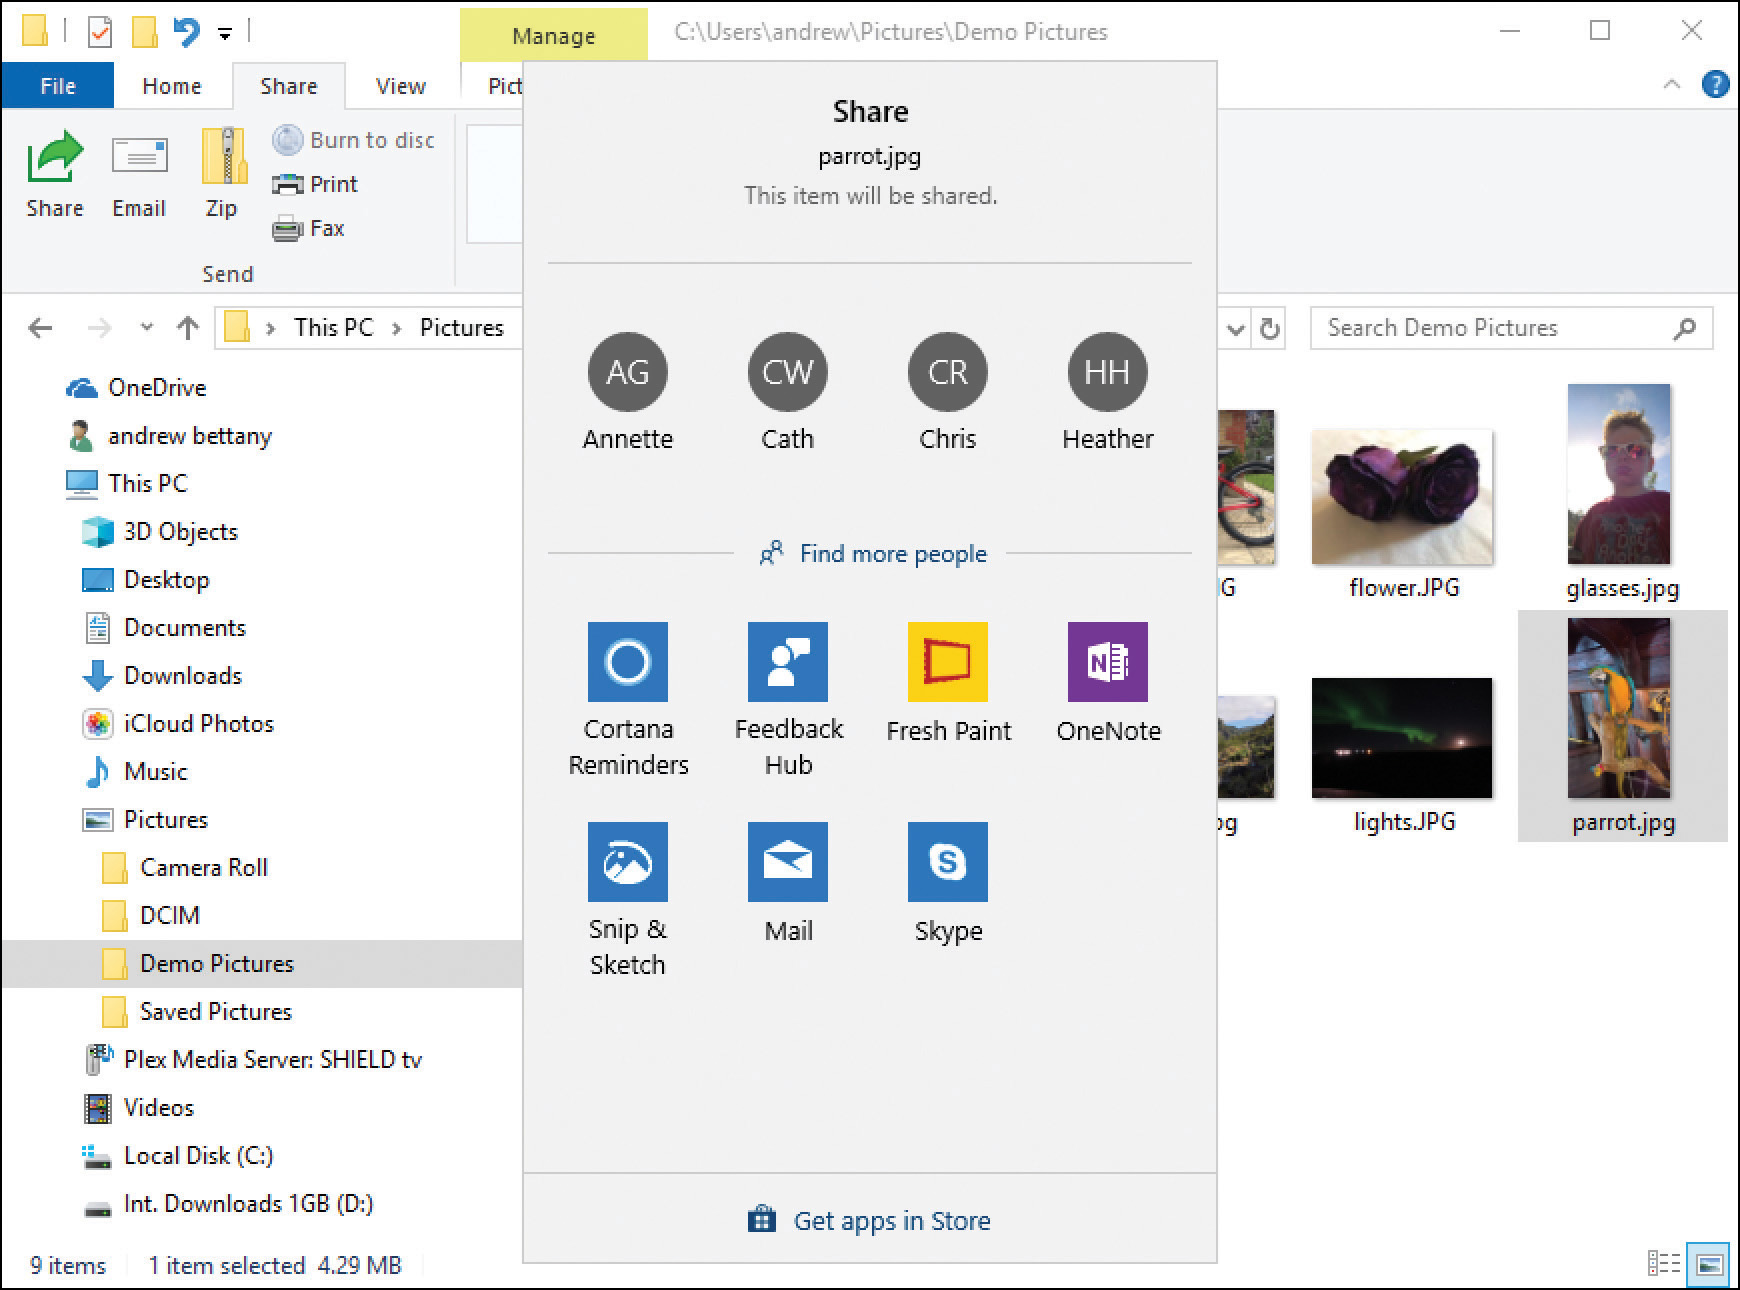 A screenshot shows the File Explorer with the Demo Pictures folder selected and a photograph of a parrot selected. The context share menu is shown in the foreground with a list of four users at the top, Annette, Cath, Chris, and Heather, and below are app icons for Cortana Reminders, Feedback Hub, Fresh Paint, OneNote, Snip & Sketch, Mail, and Skype.